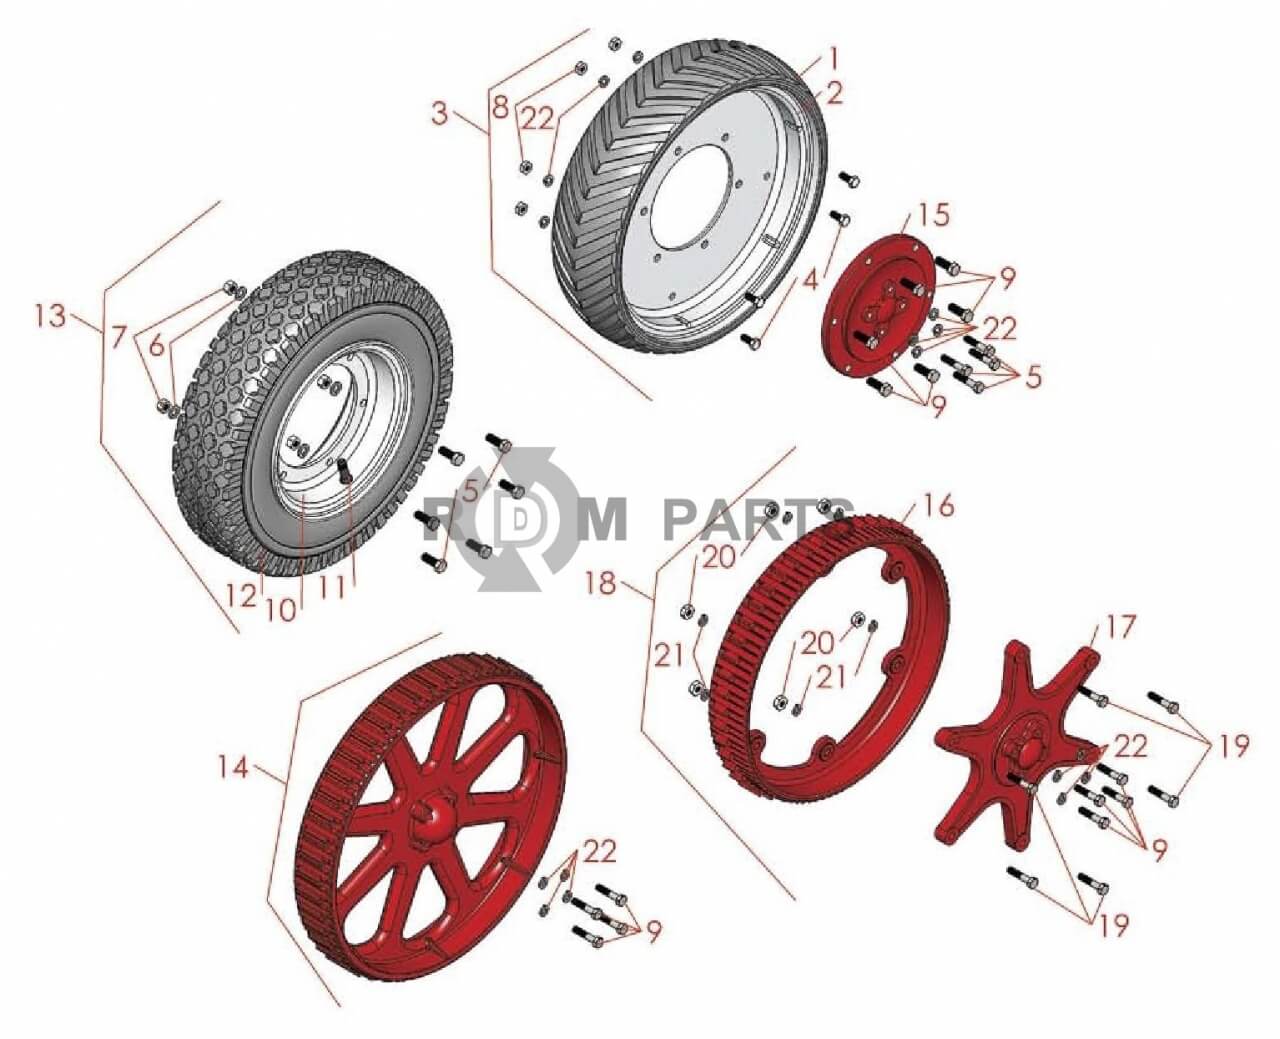 Replacement parts for Toro Fairway parts - wheels